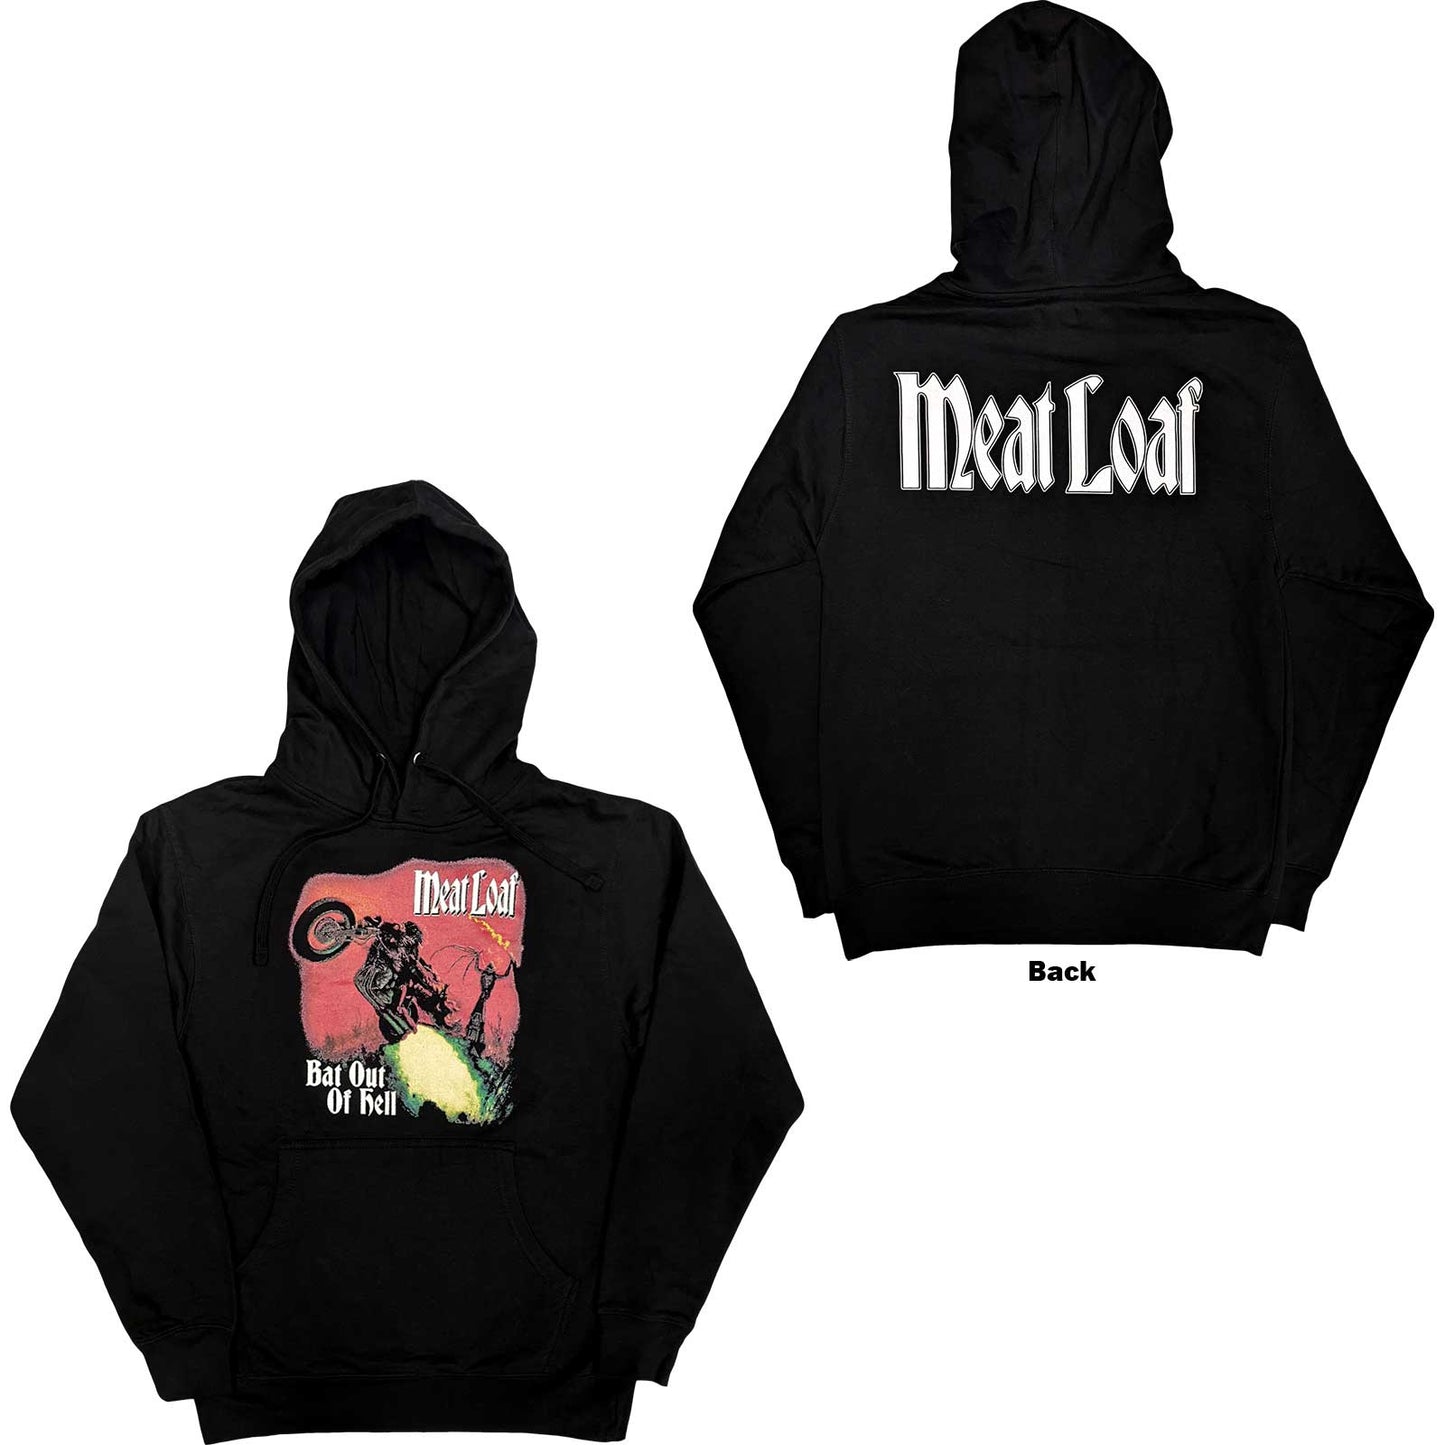 MEAT LOAF - Bat Out Of Hell Cover Hoodie